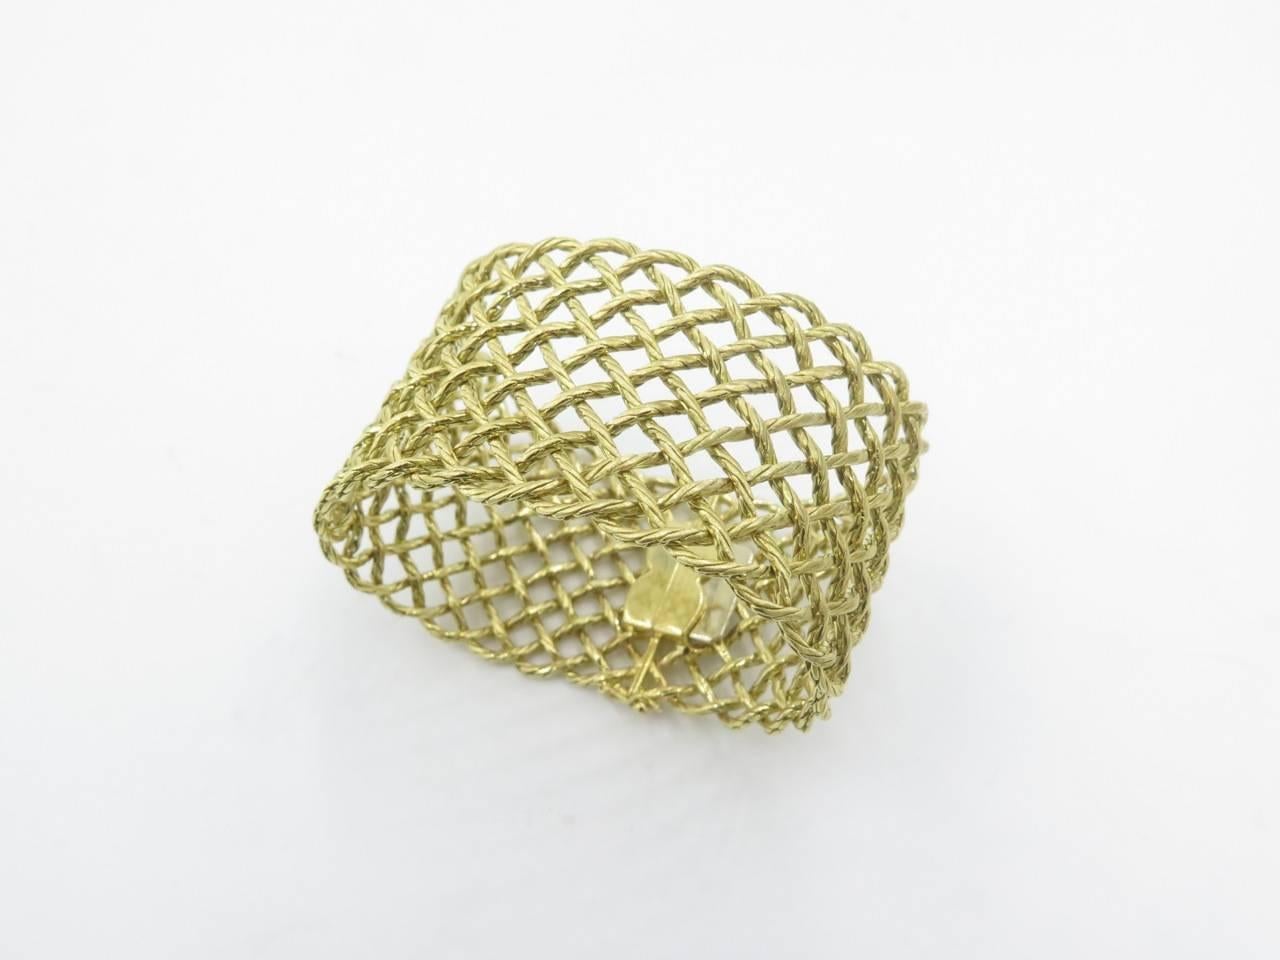 An 18 Karat Yellow Gold Buccellati Gold Crepe de Chine Bracelet.  Circa 1990.  Designed as a flexible openwork matte gold rope work cuff bracelet.  Length is approximately 7 1/4 inches.  Gross weight 69.6 grams.  Stamped Buccellati, Italy. 18K. 